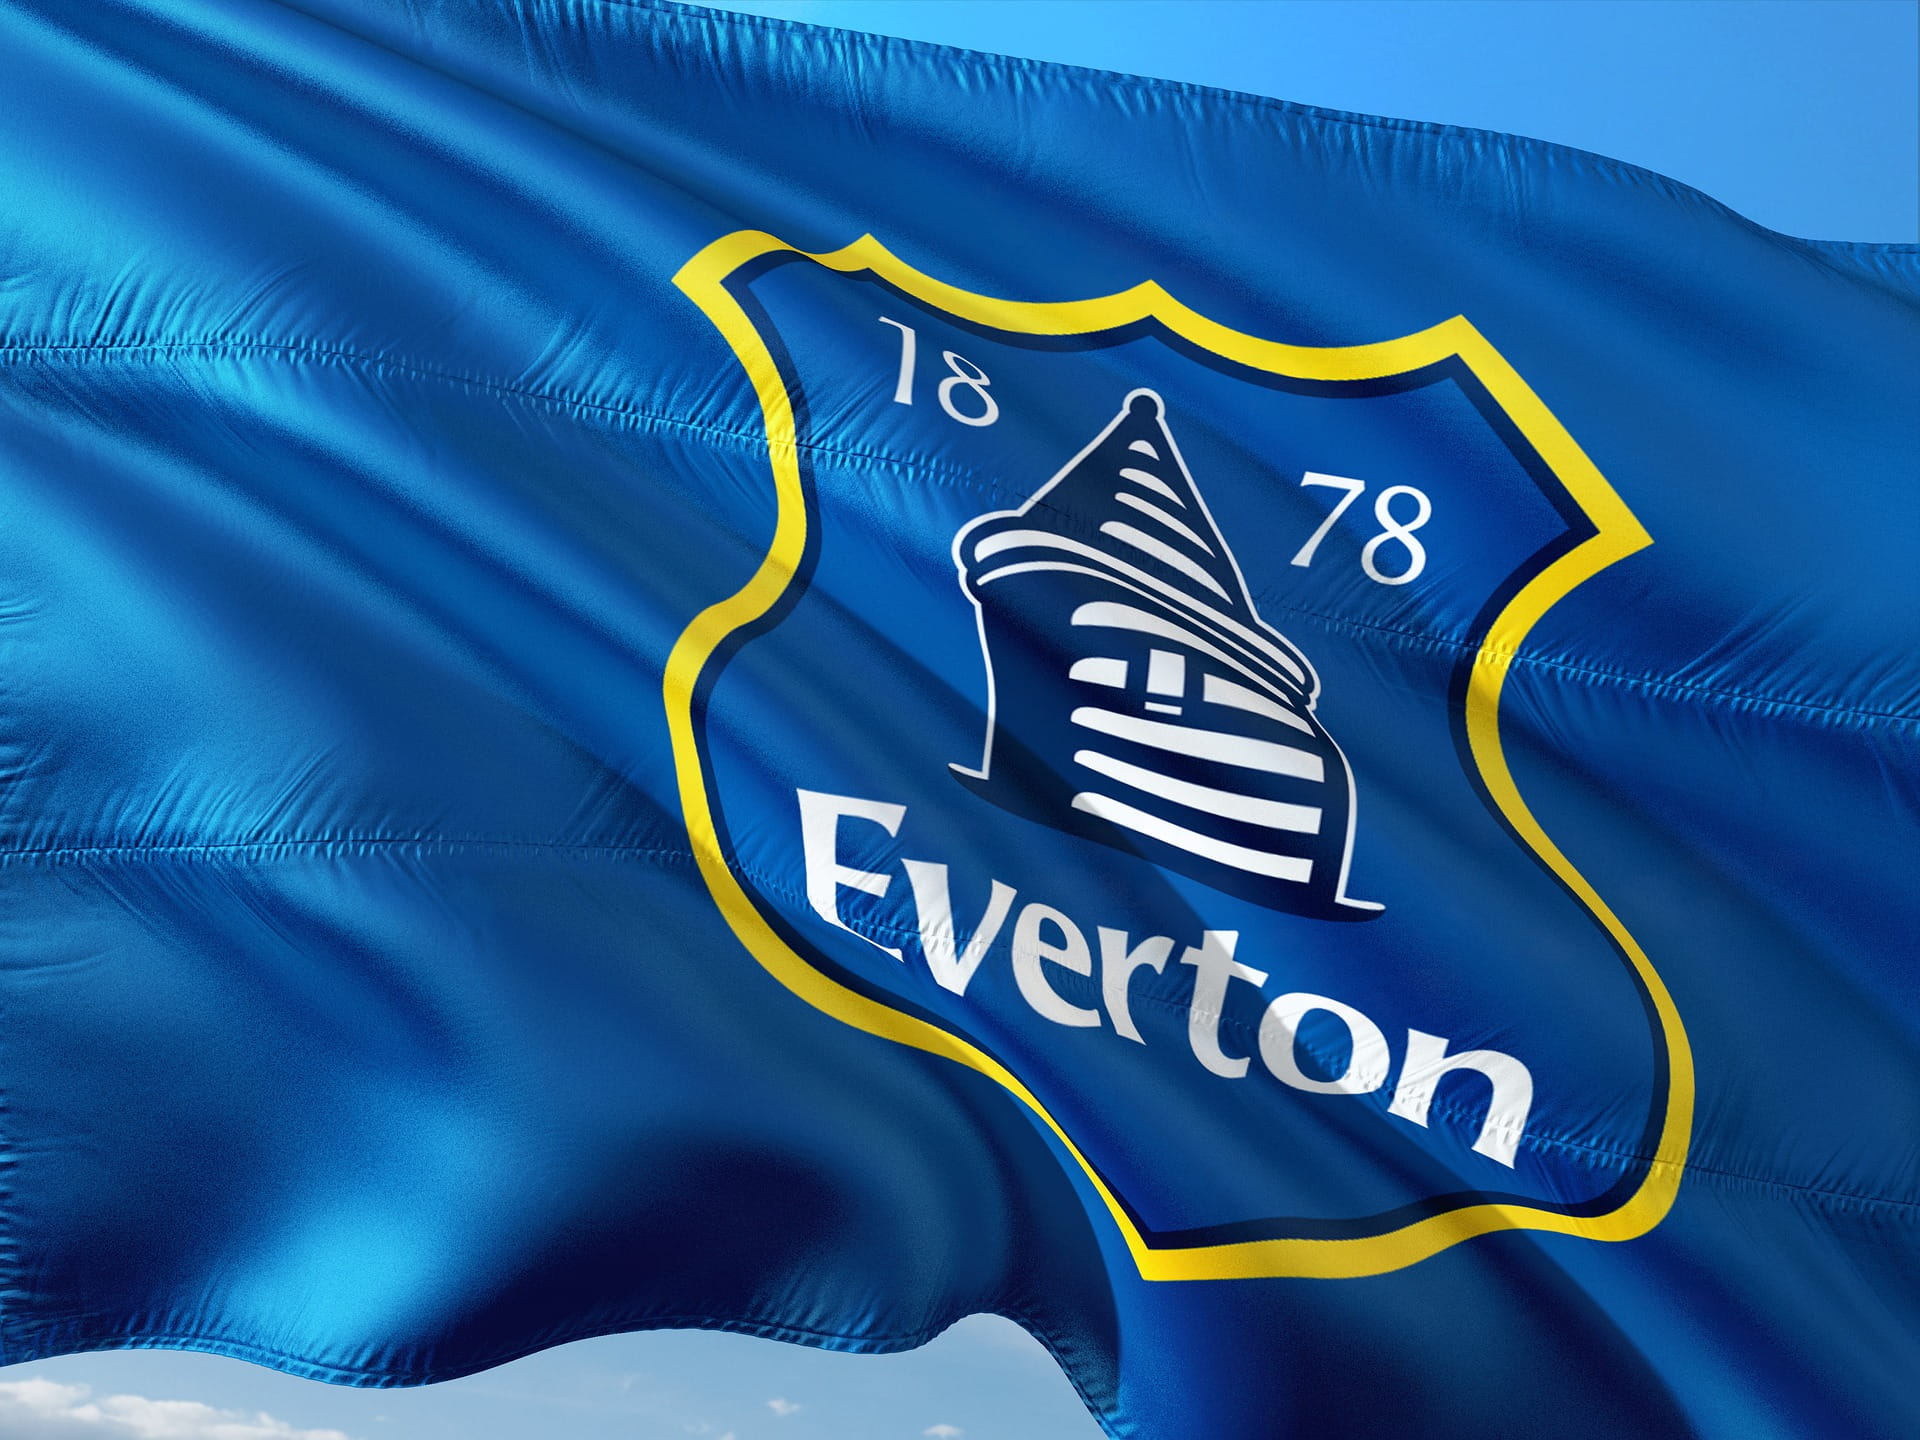 A picture of an Everton flag blowing in the wind